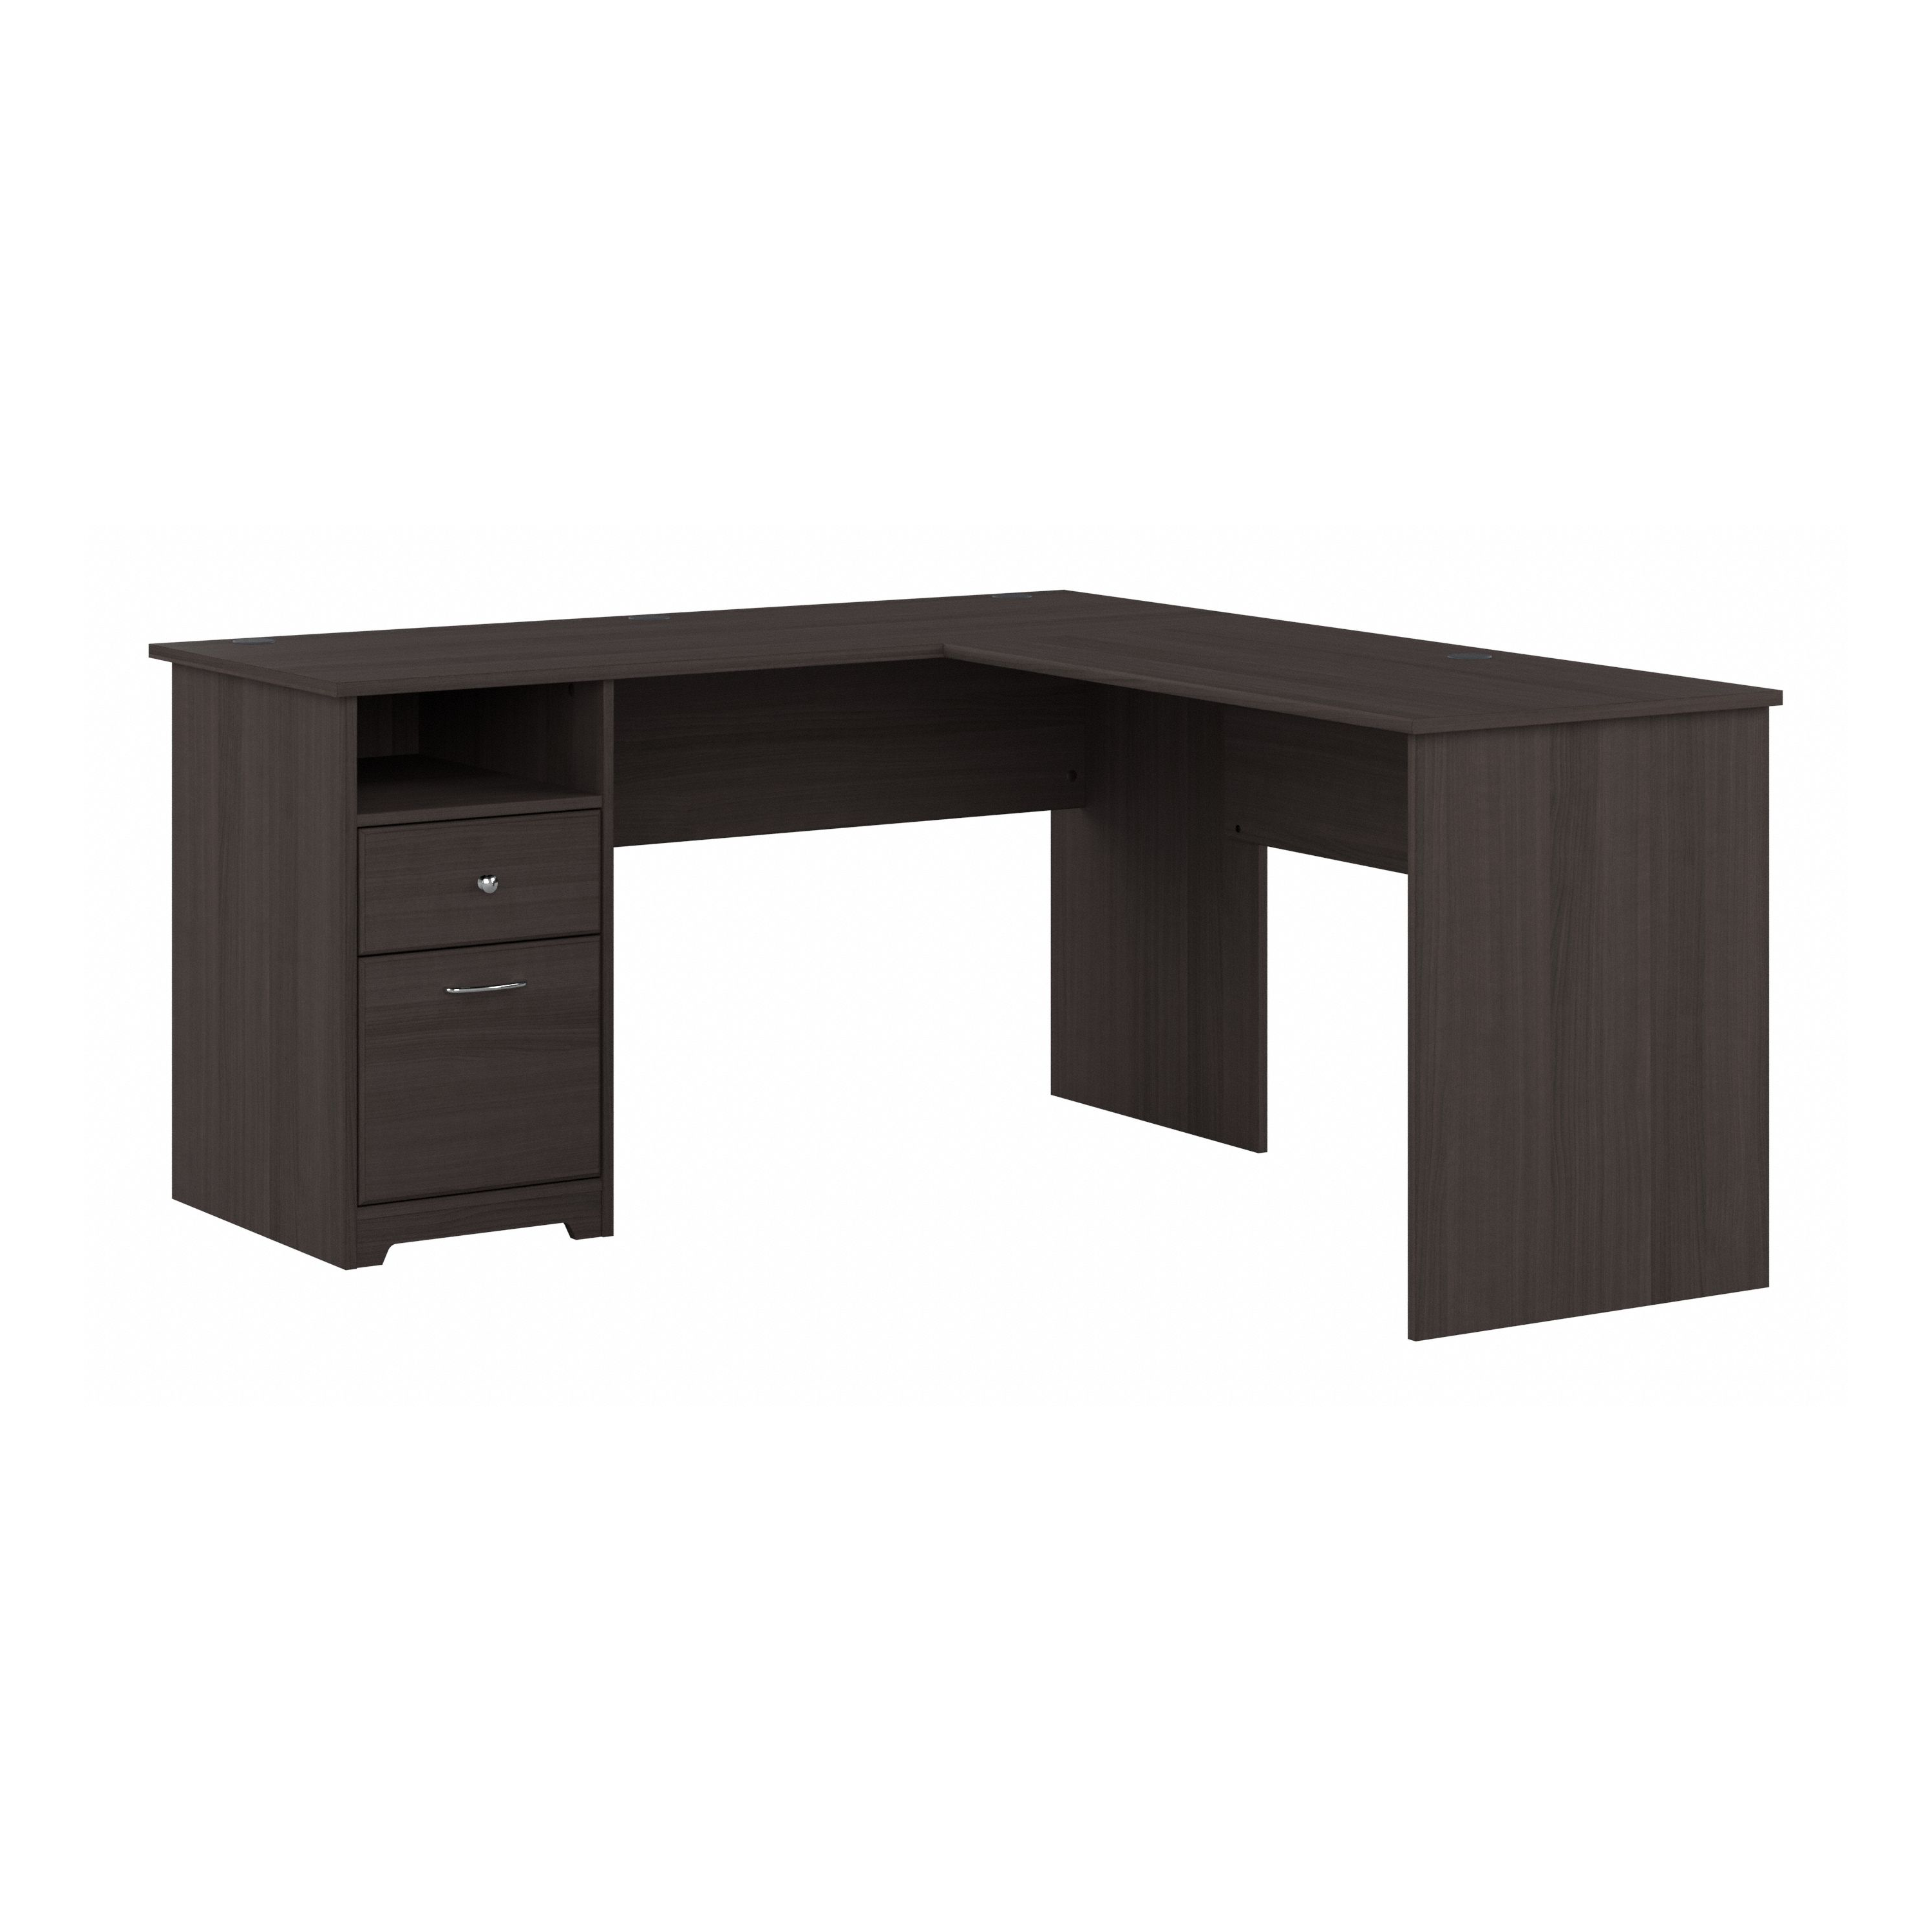 Shop Bush Furniture Cabot 60W L Shaped Computer Desk with Drawers 02 CAB044HRG #color_heather gray